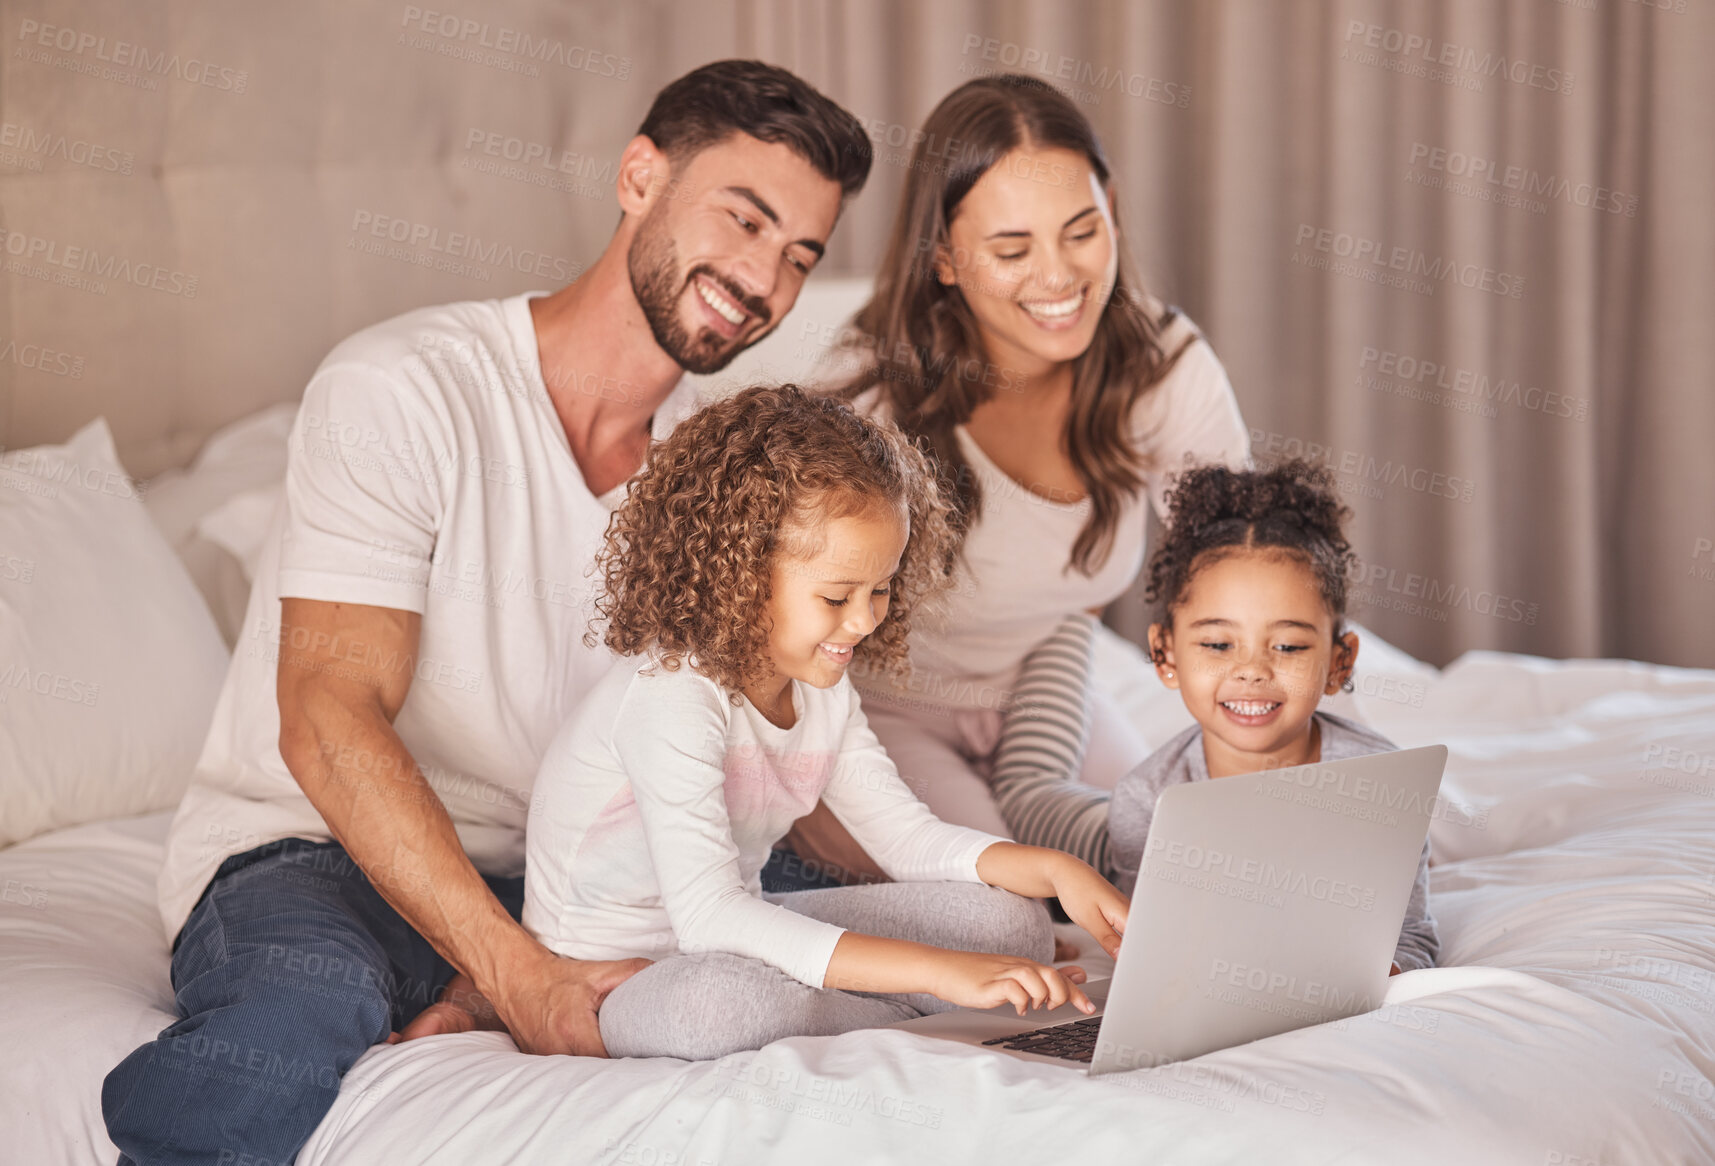 Buy stock photo Family, laptop and relax on bed together with kids for bonding time. Caring home, parents and young daughters with happy relationship. Smiling couple and children having quality time while relaxing.